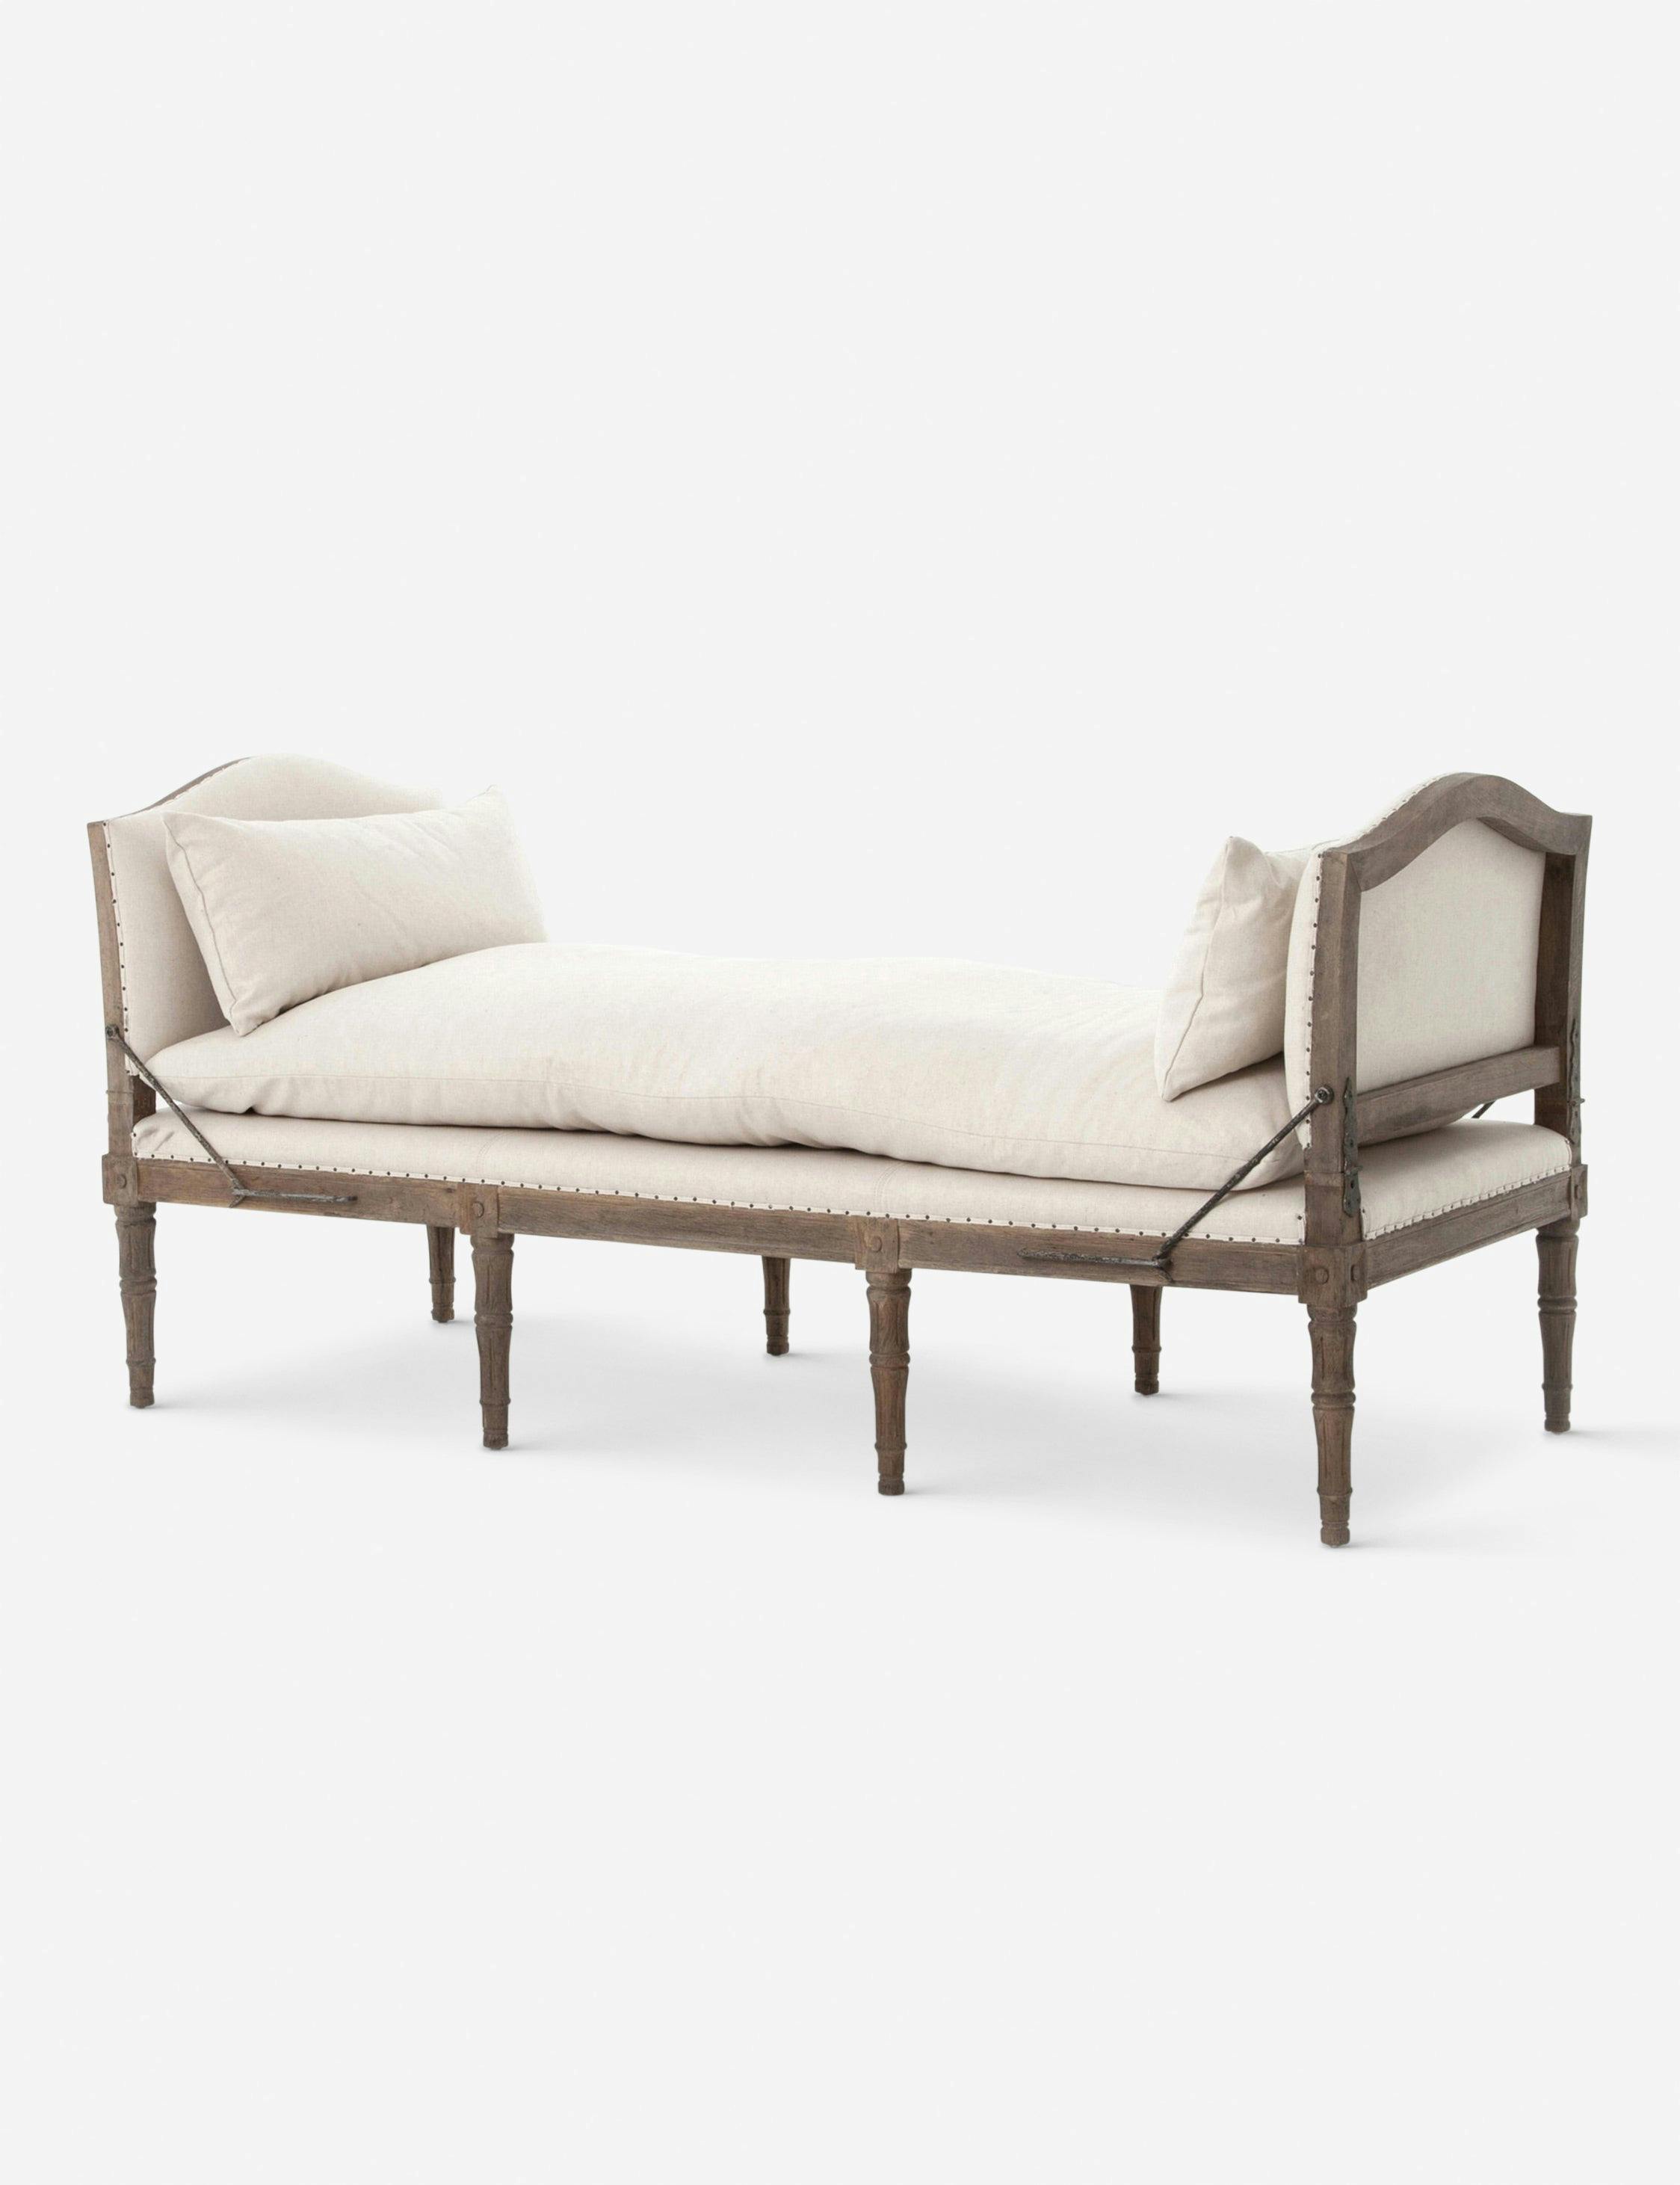 Trista Natural Linen Weathered Oak Chaise